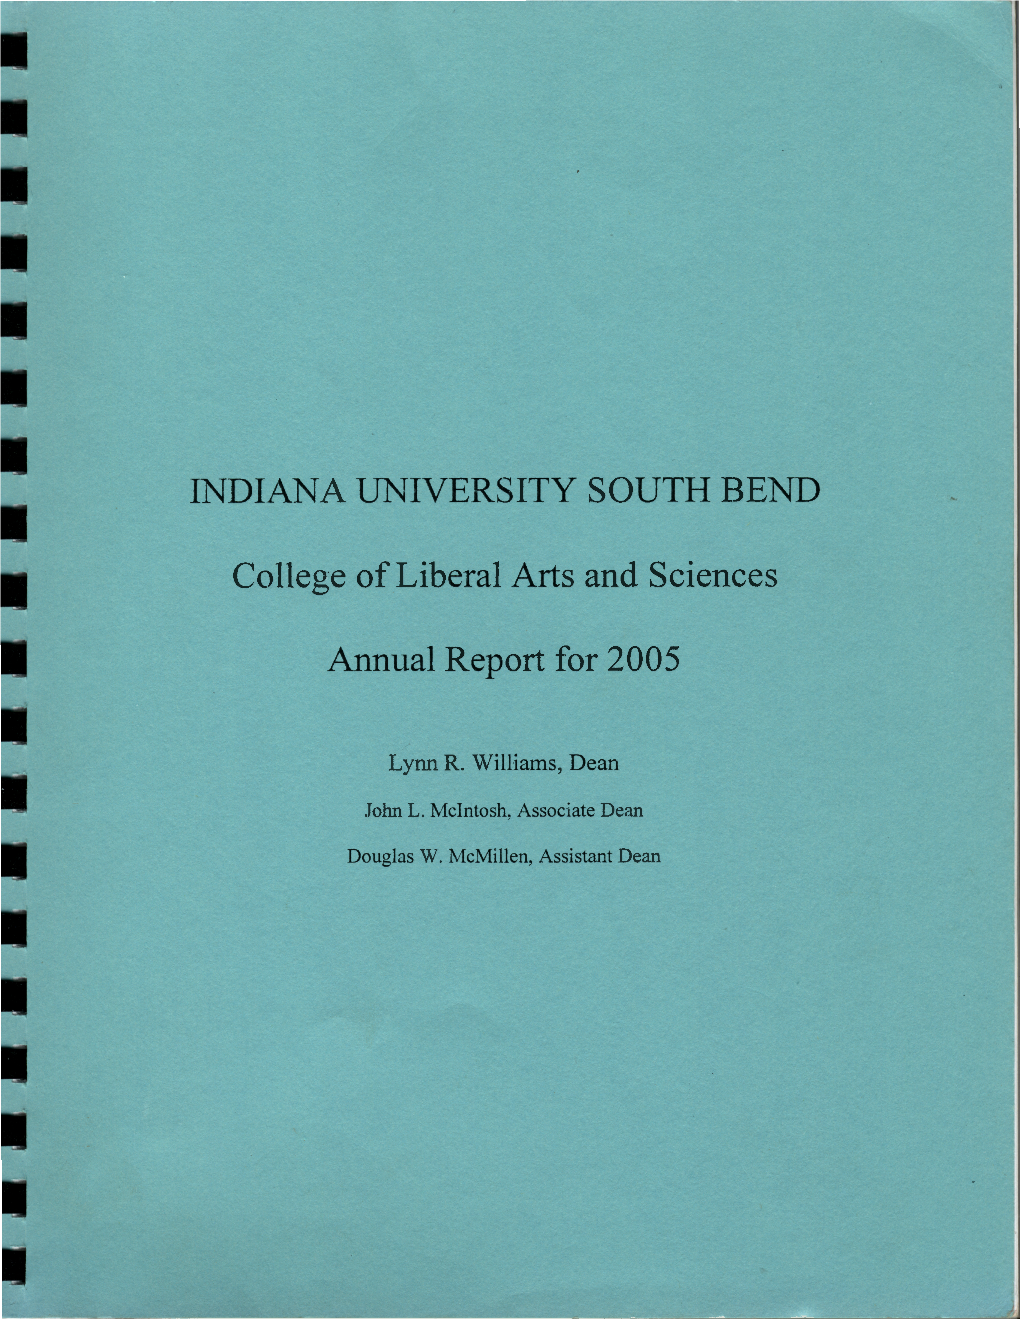 Indiana University South Bend College of Liberal Arts and Sciences Annual Report for 2005